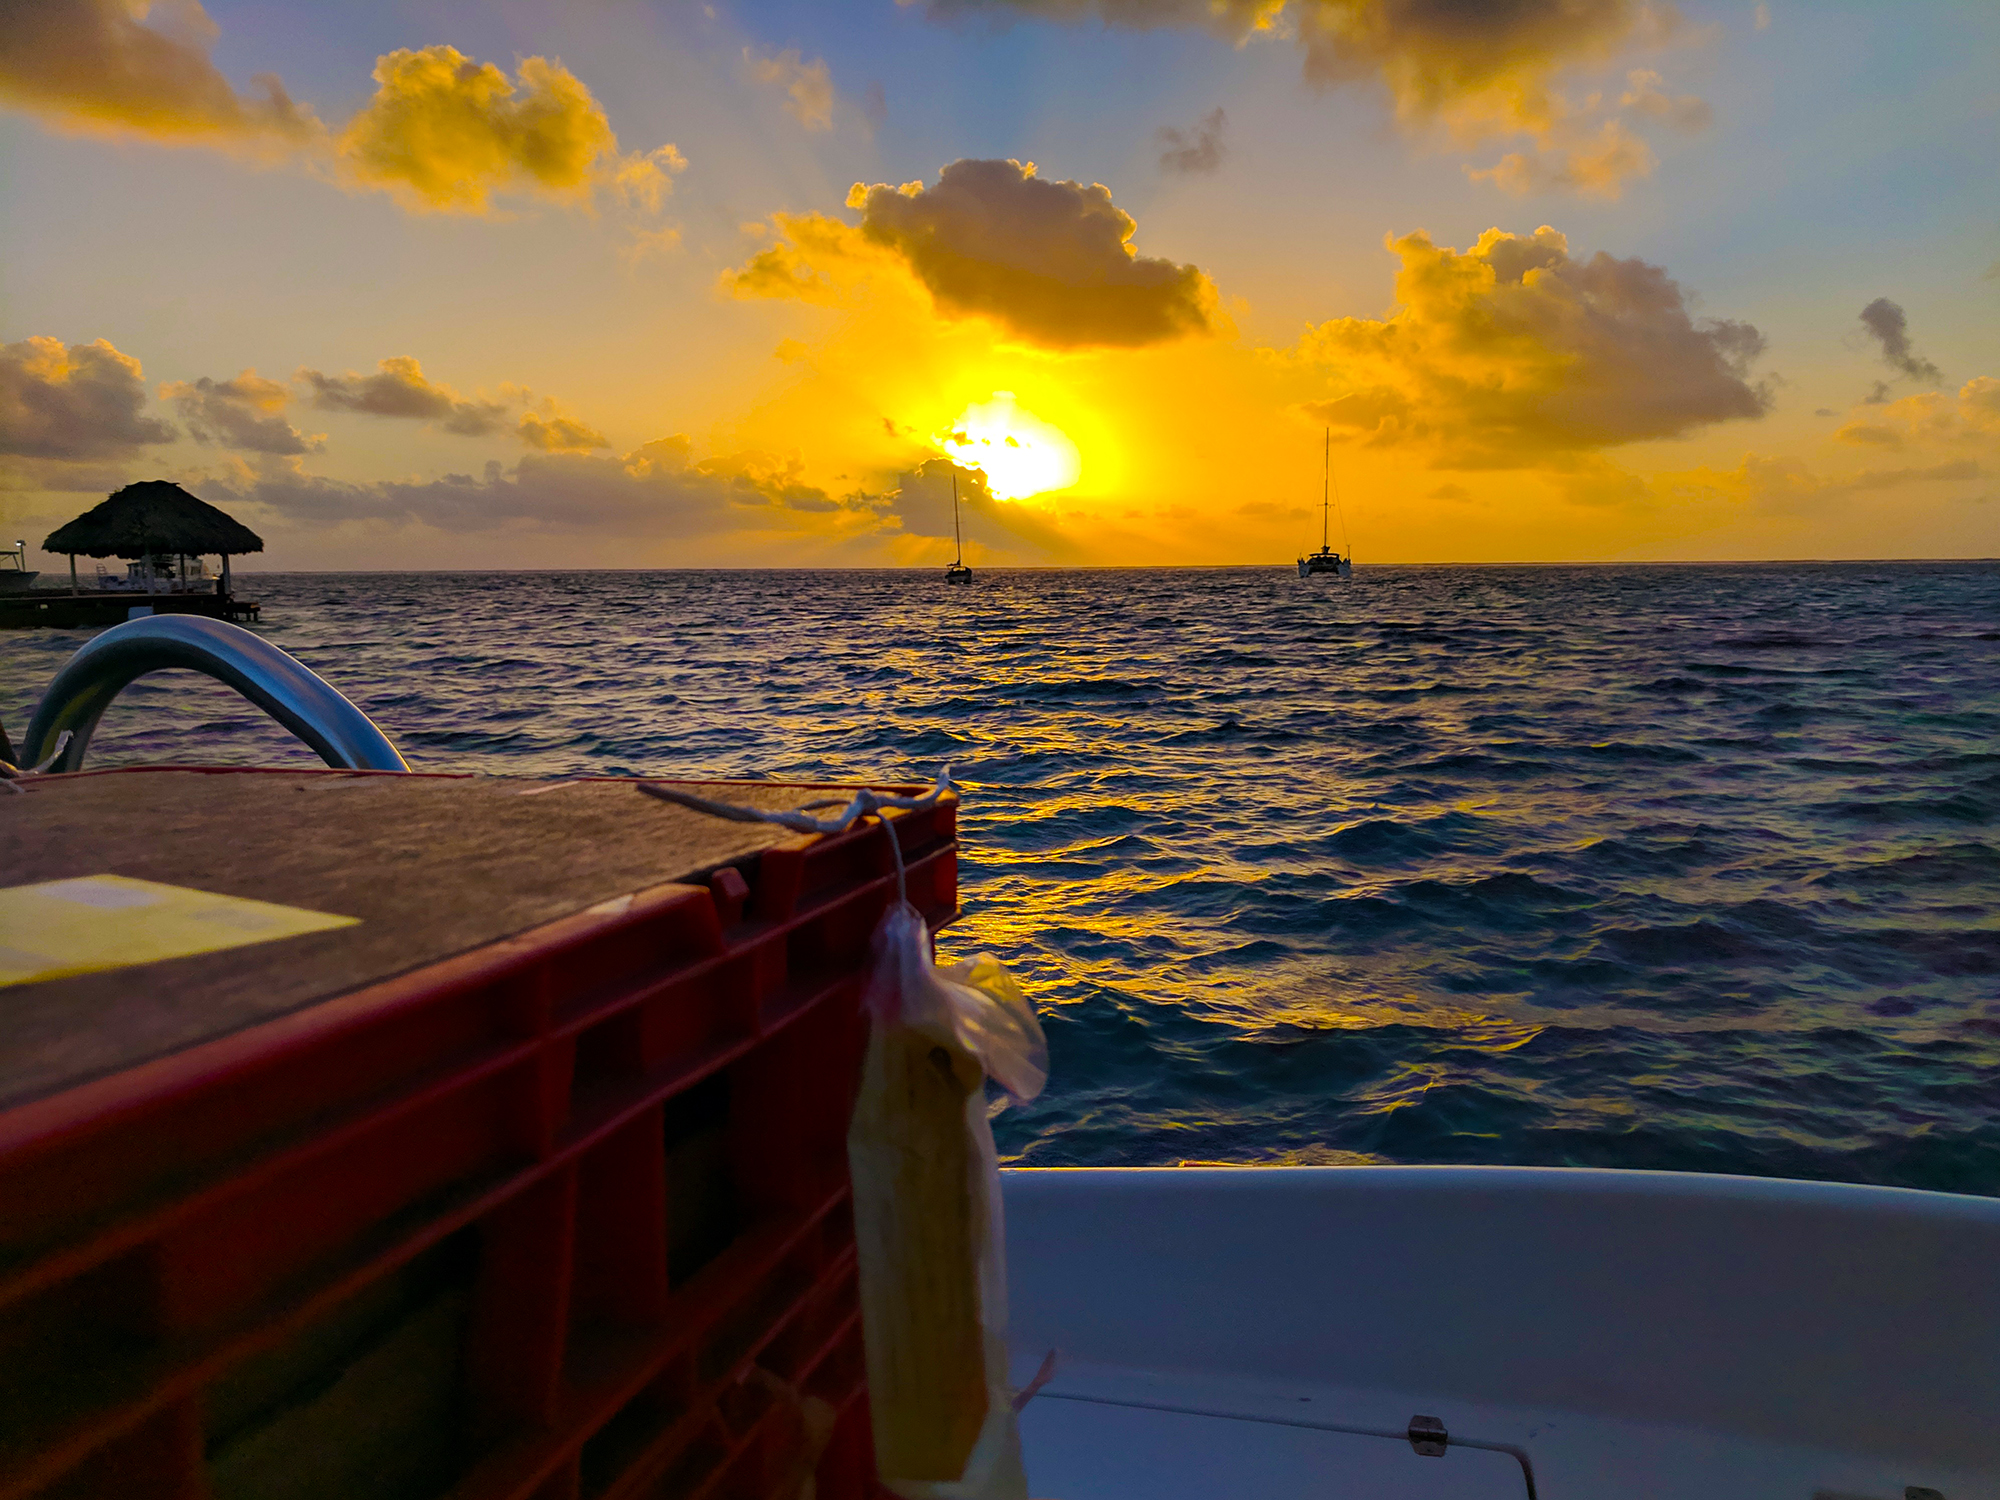 sunrise over caribbean sea from ferry in san pedro belize